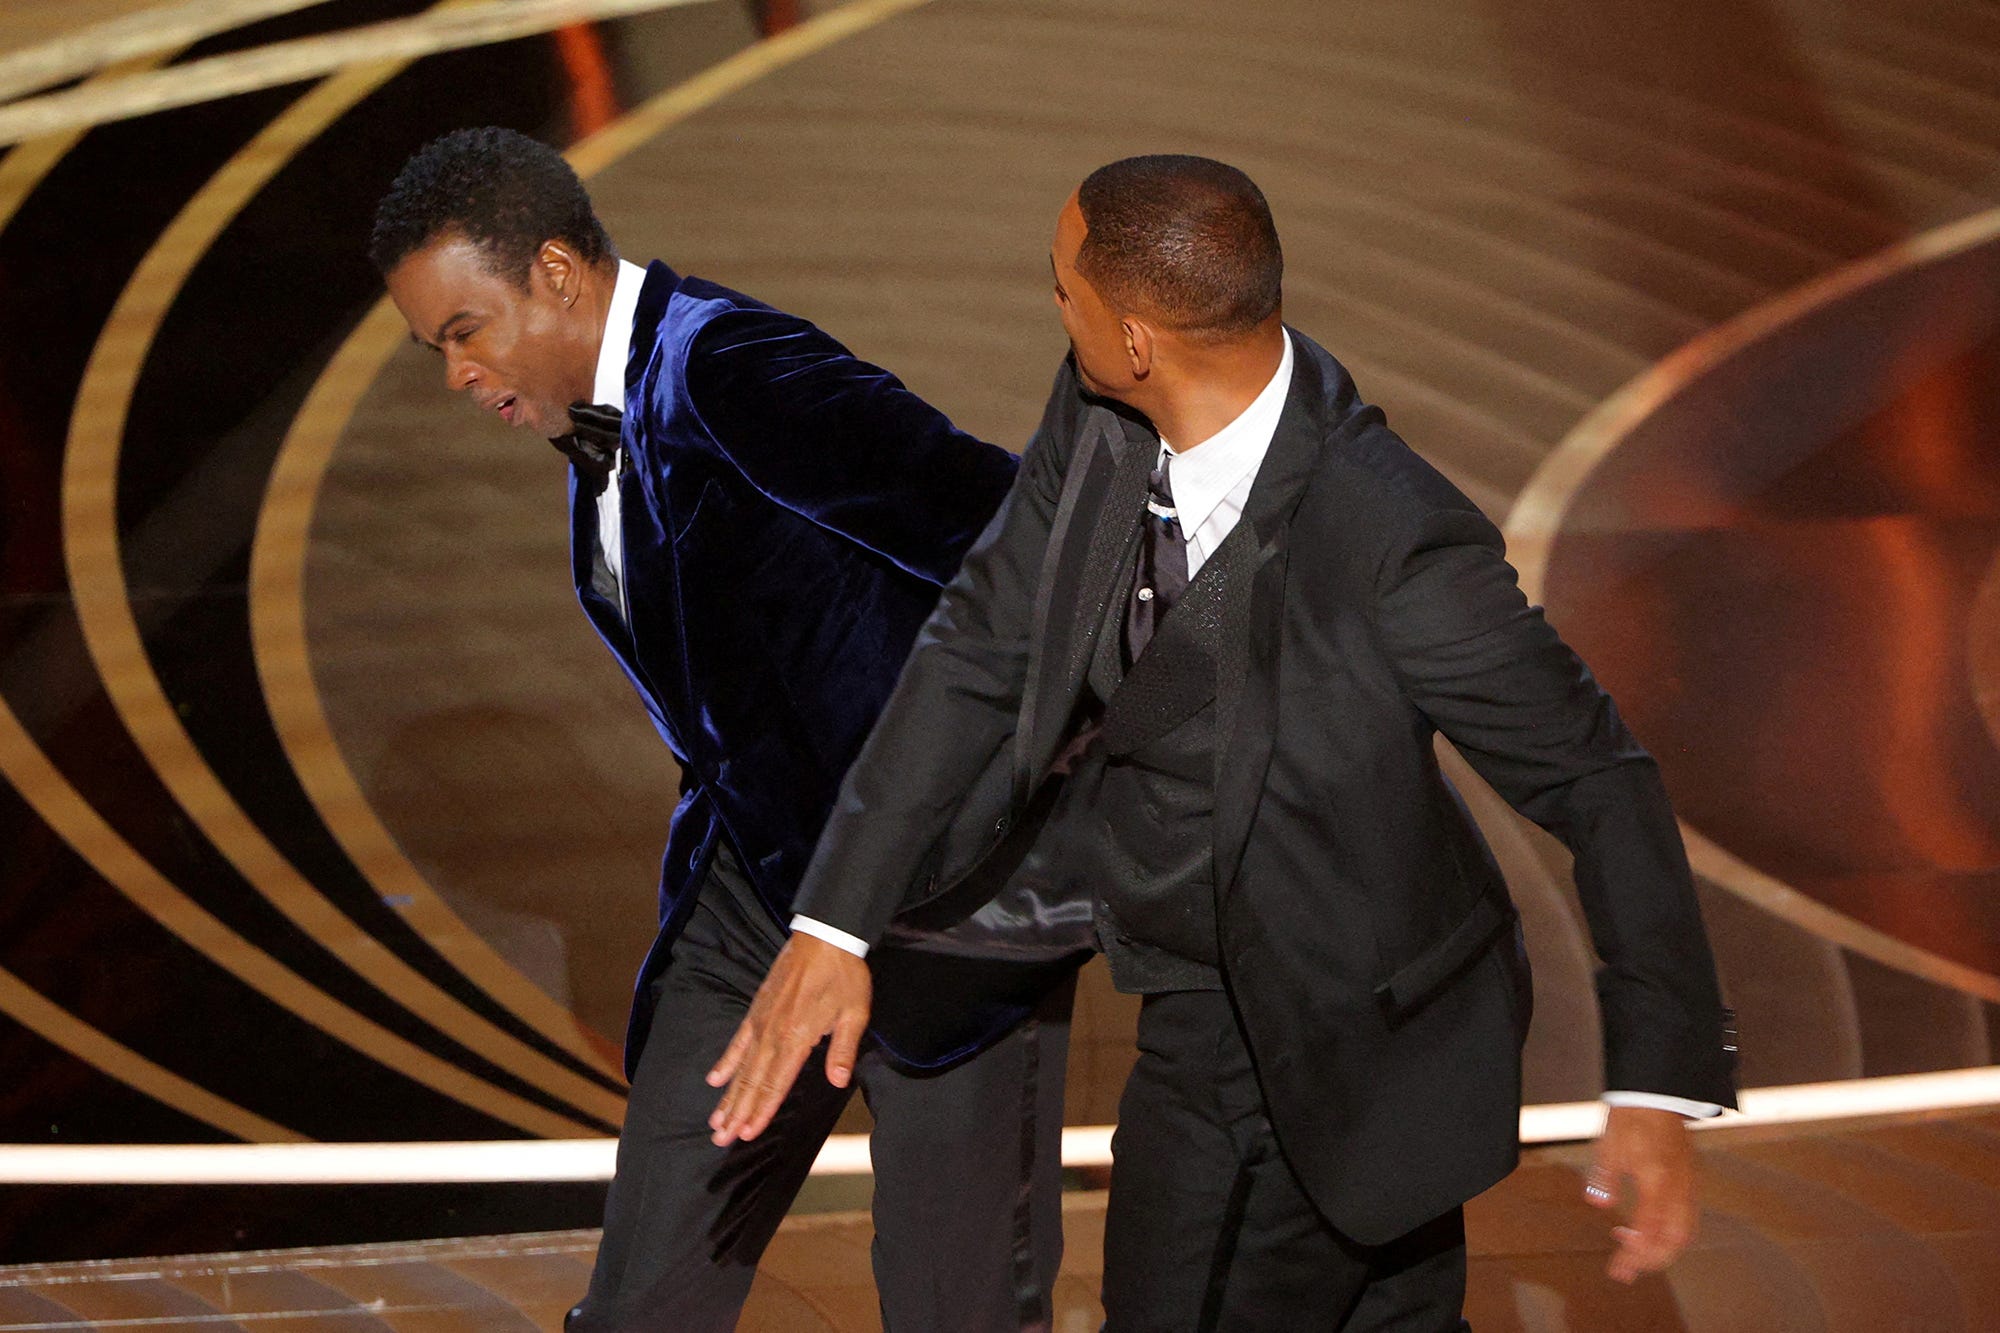 Will Smith slapping Chris Rock at the 2022 Oscars